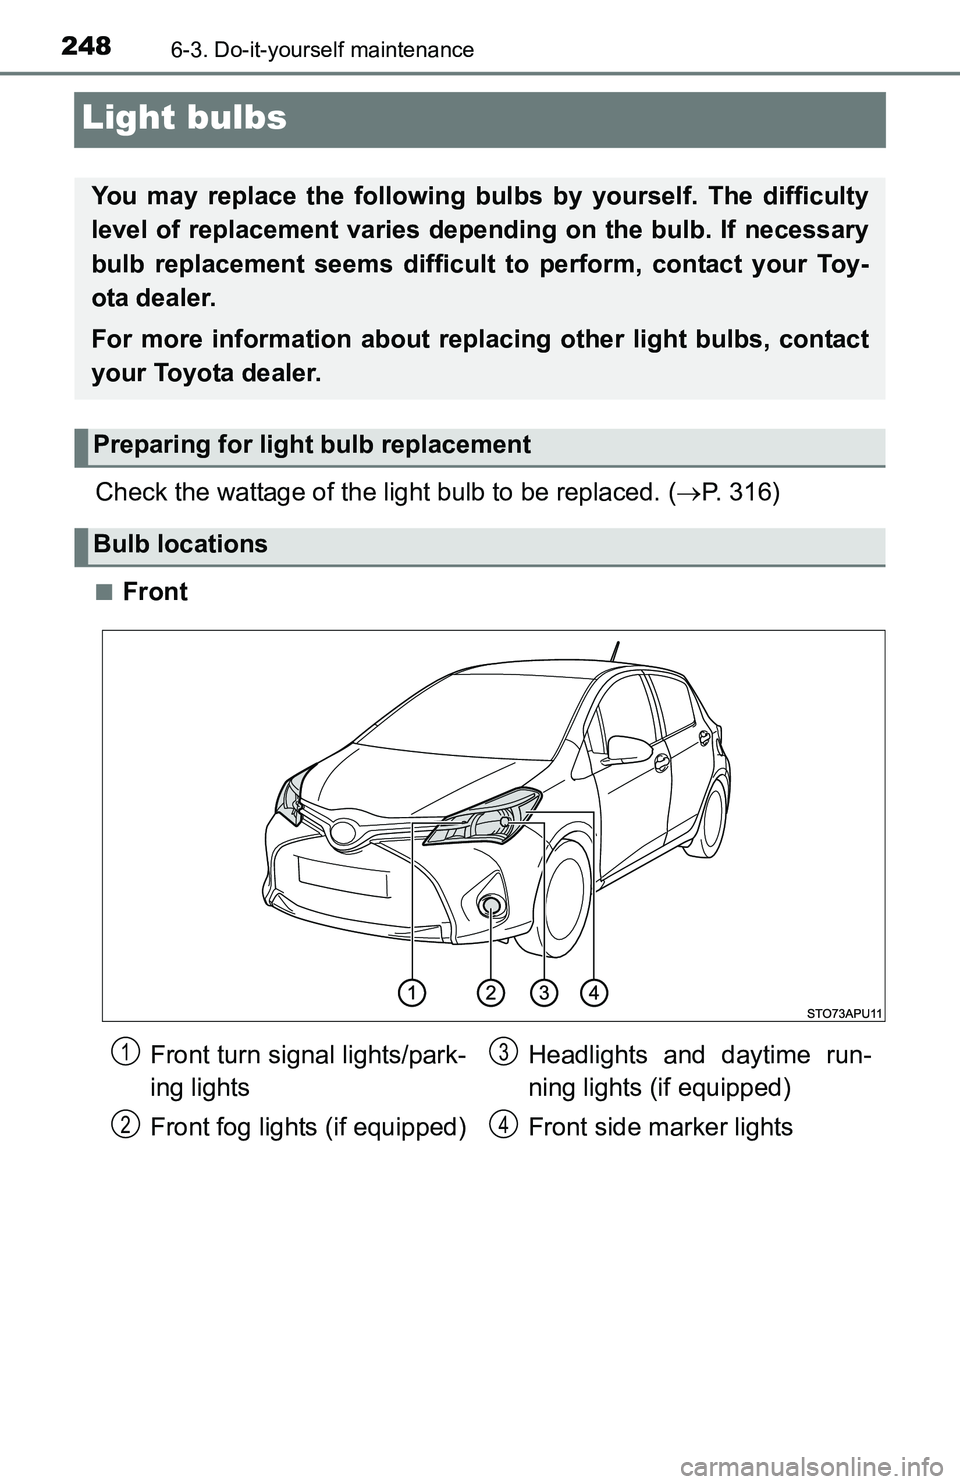 TOYOTA YARIS HATCHBACK 2016  Owners Manual 2486-3. Do-it-yourself maintenance
Light bulbs
Check the wattage of the light bulb to be replaced. (P. 316)
■Front
You may replace the following bulbs  by yourself. The difficulty
level of replac